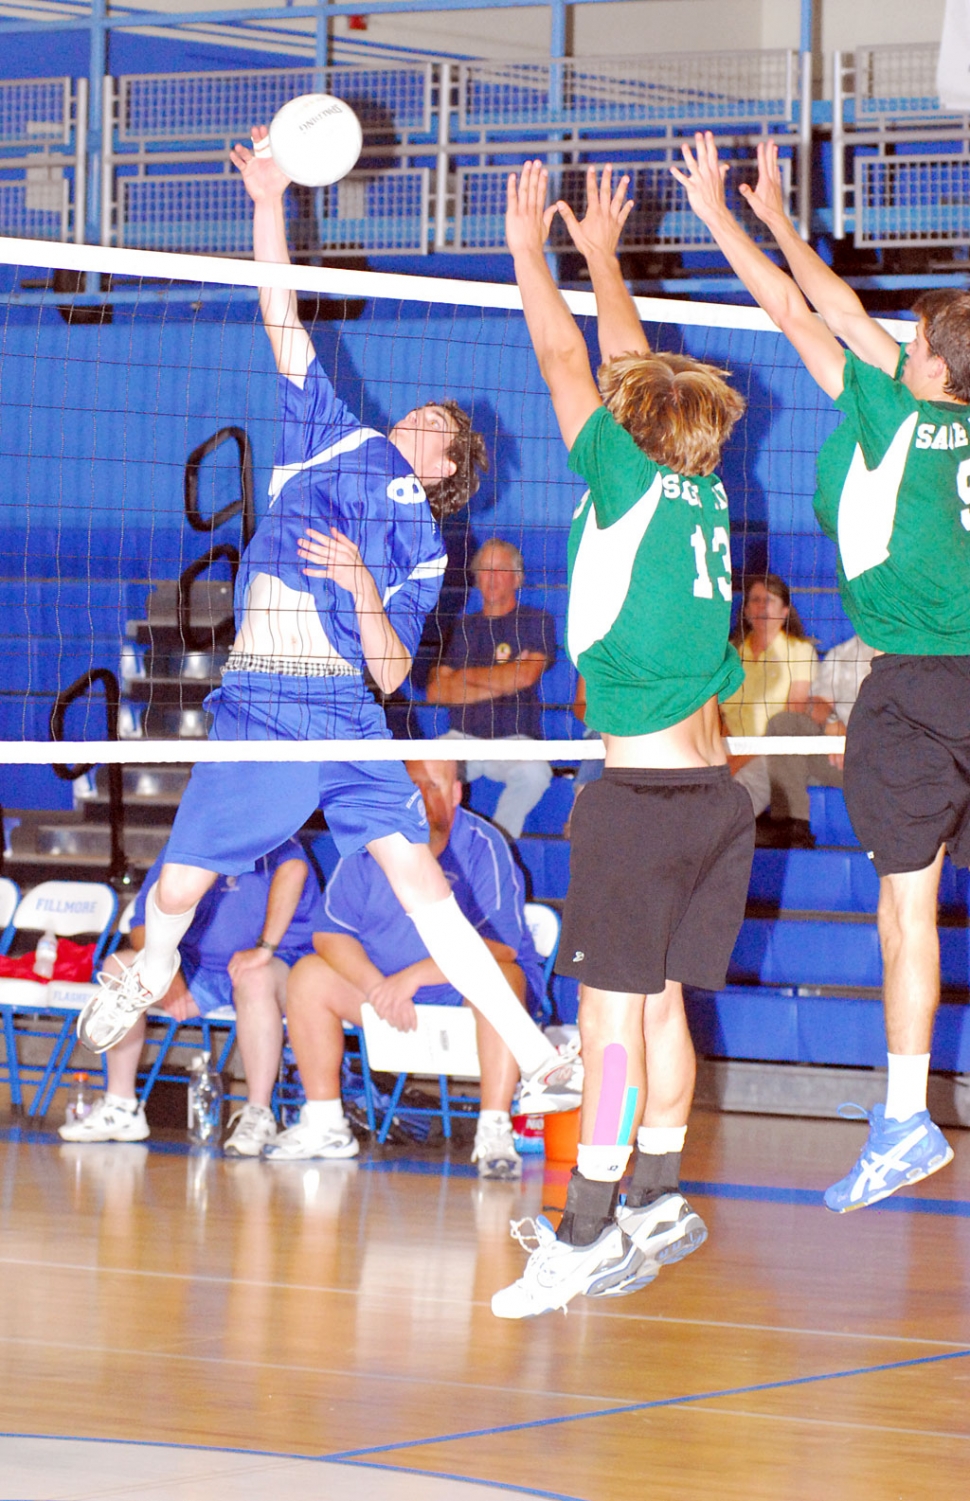 Above, Vincent Fergusen slams the ball over Sage Hill for a point, despite the two defenders. Fillmore lost in the second round of CIF in four games: 25-19, 25-15, (F)25-19, 25-15. This was their first CIF appearance. On Tuesday, May 26th, Boy Vollyball held their banquet. Awards were presented to the following; MVP- Noah Aguirre, Rookie of the Year- Gera Avalos, Captain - Vincente Ferguson, and Defensive Player of the Year - Chris De La Paz.